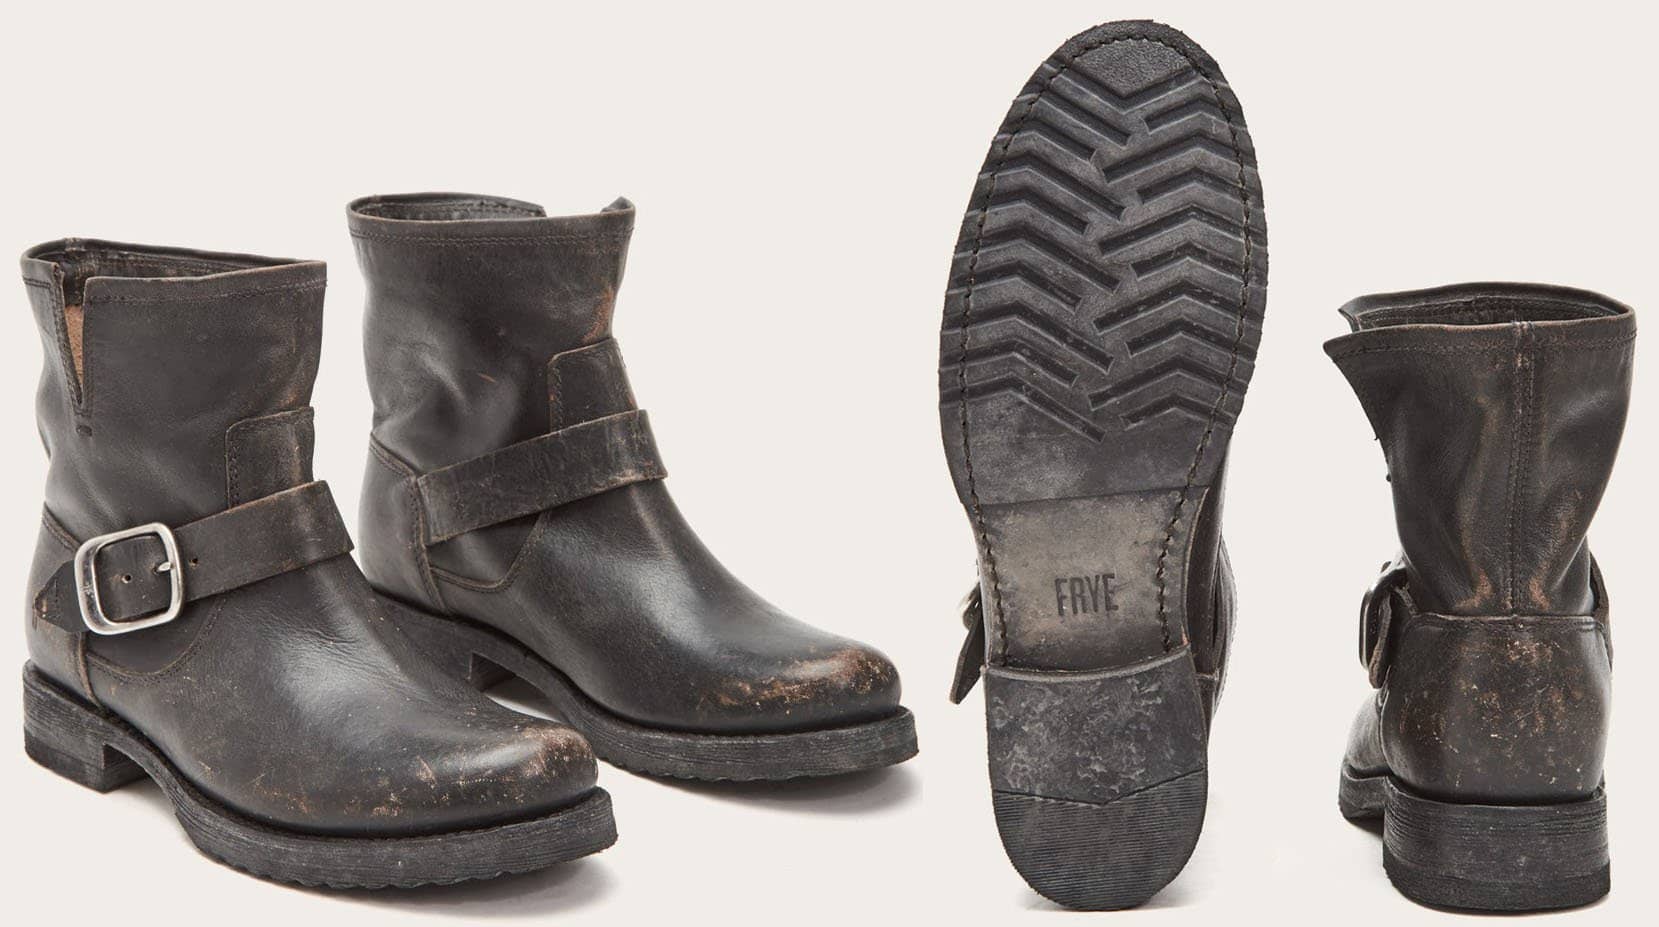 Taking inspiration from a vintage motorcycle jacket, the Veronica bootie is crafted from stone-tumbled full-grain brush-off leather and features hand-stitched Goodyear welt soles